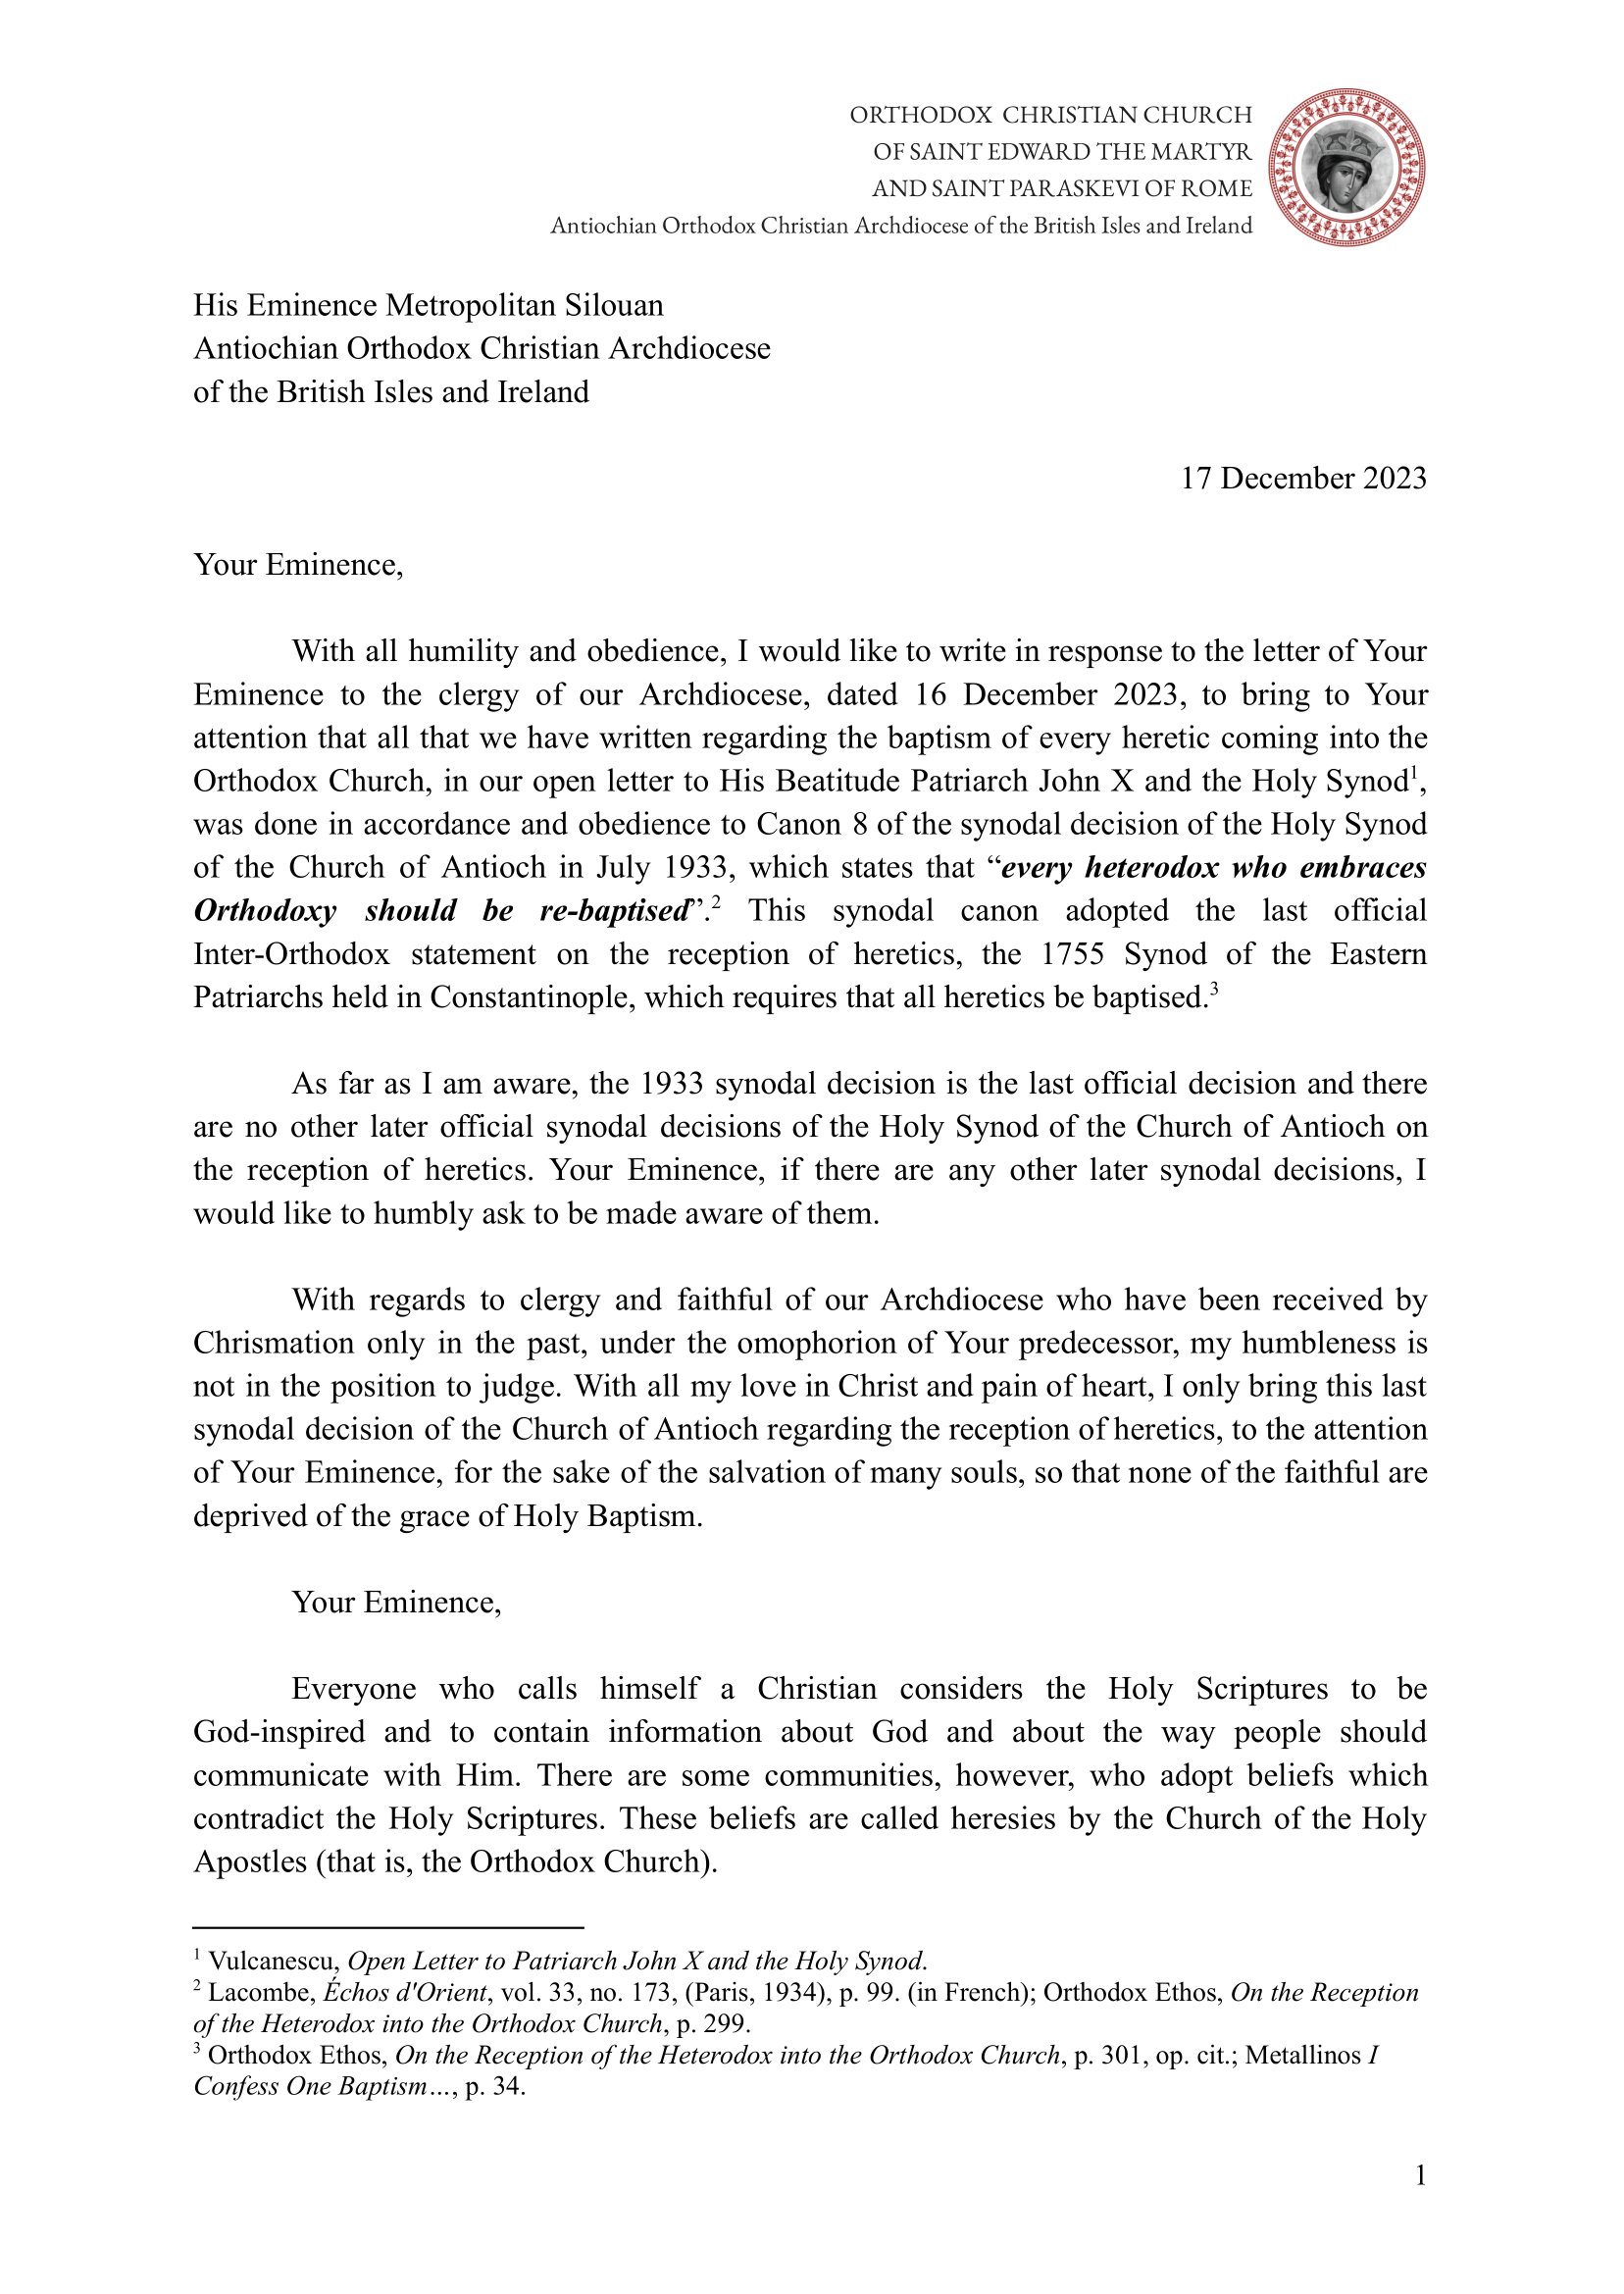 The Response Letter of Father Matthew Vulcanescu to Metropolitan Silouan Oner’s Letter to Clergy December 2023 – Reception by Chrismation